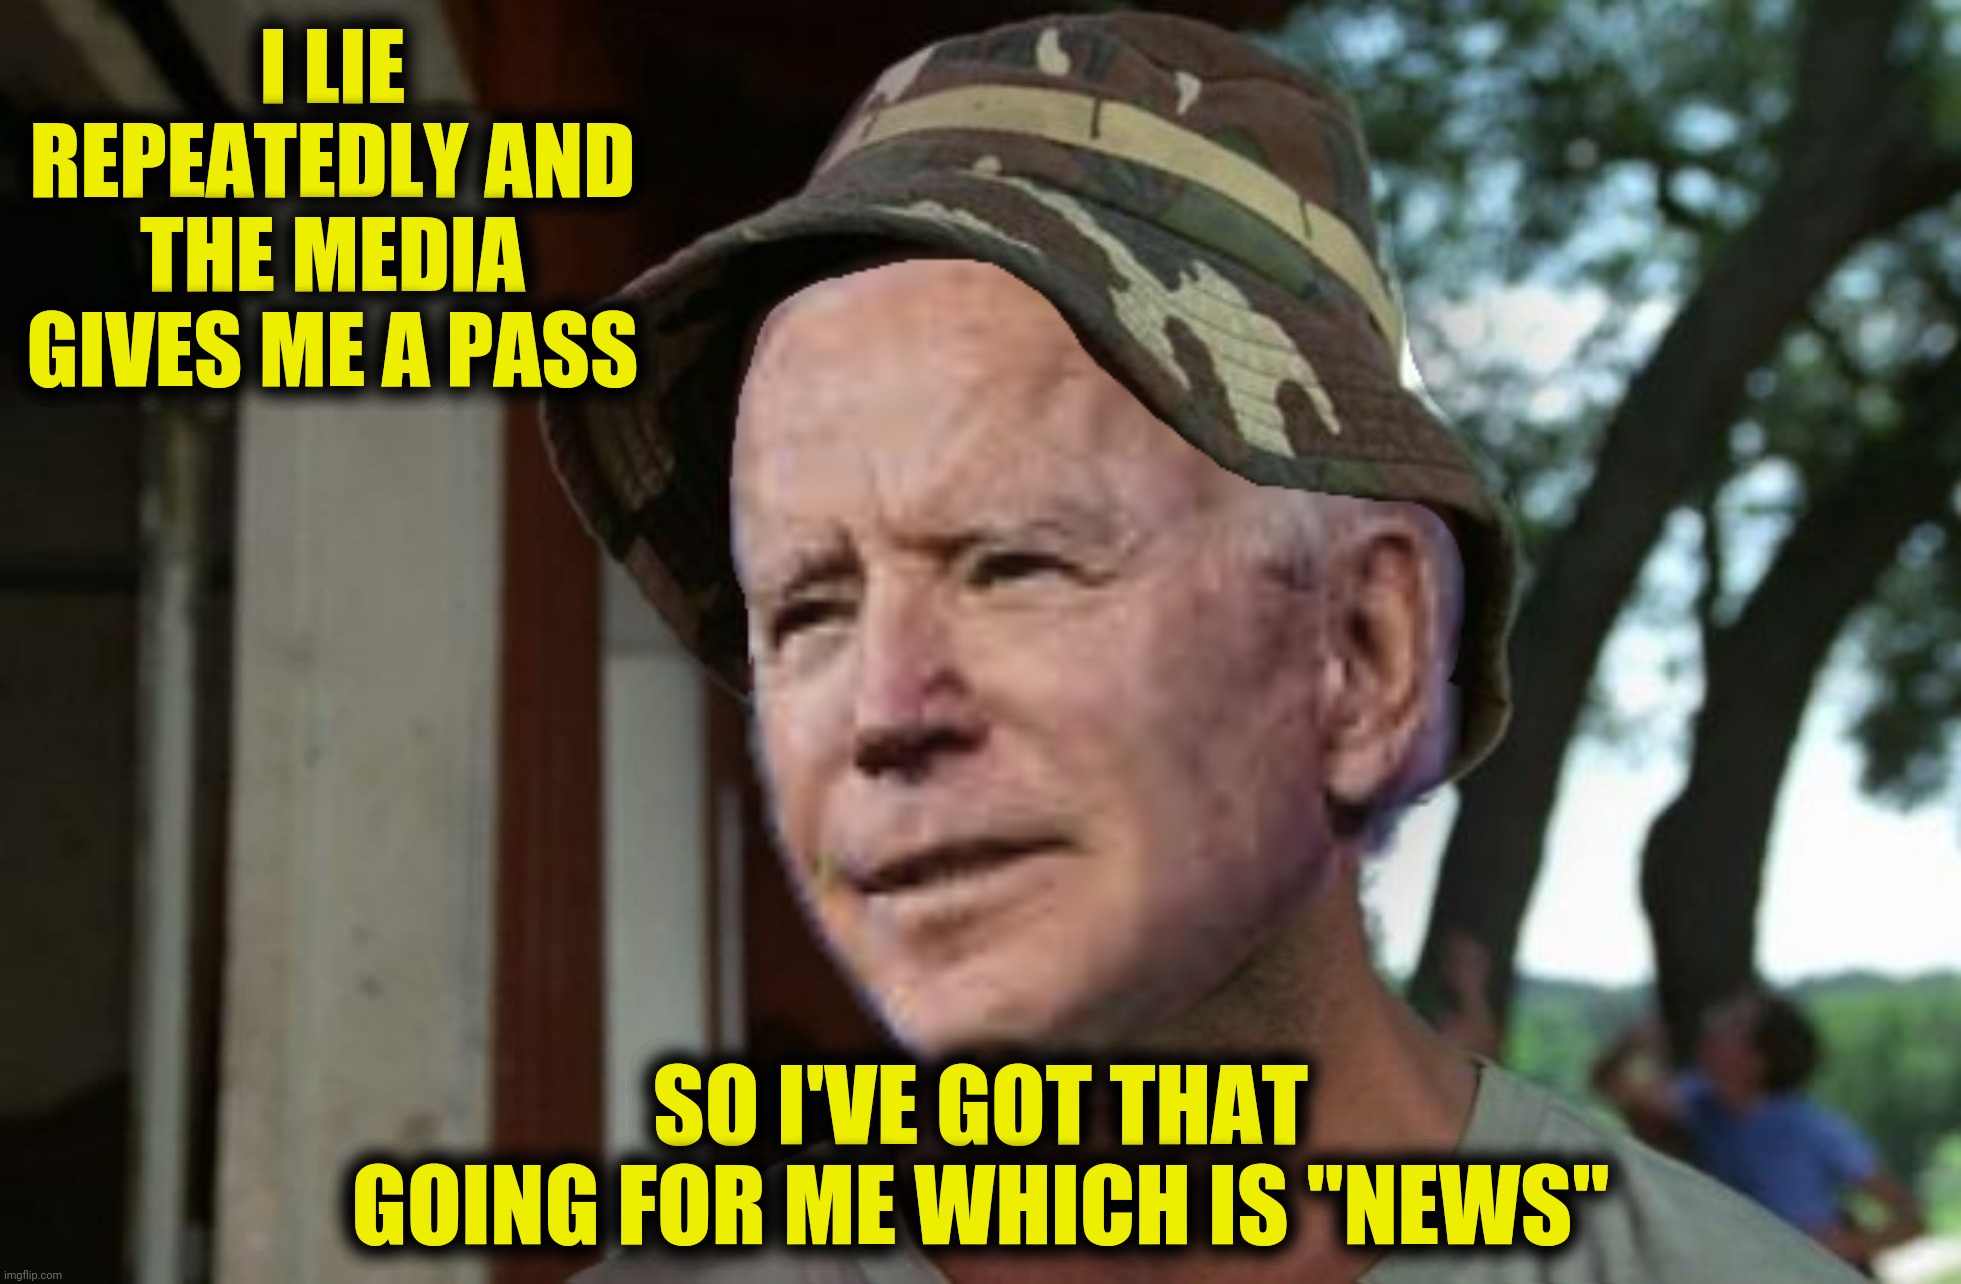 I LIE REPEATEDLY AND THE MEDIA GIVES ME A PASS SO I'VE GOT THAT GOING FOR ME WHICH IS "NEWS" | made w/ Imgflip meme maker